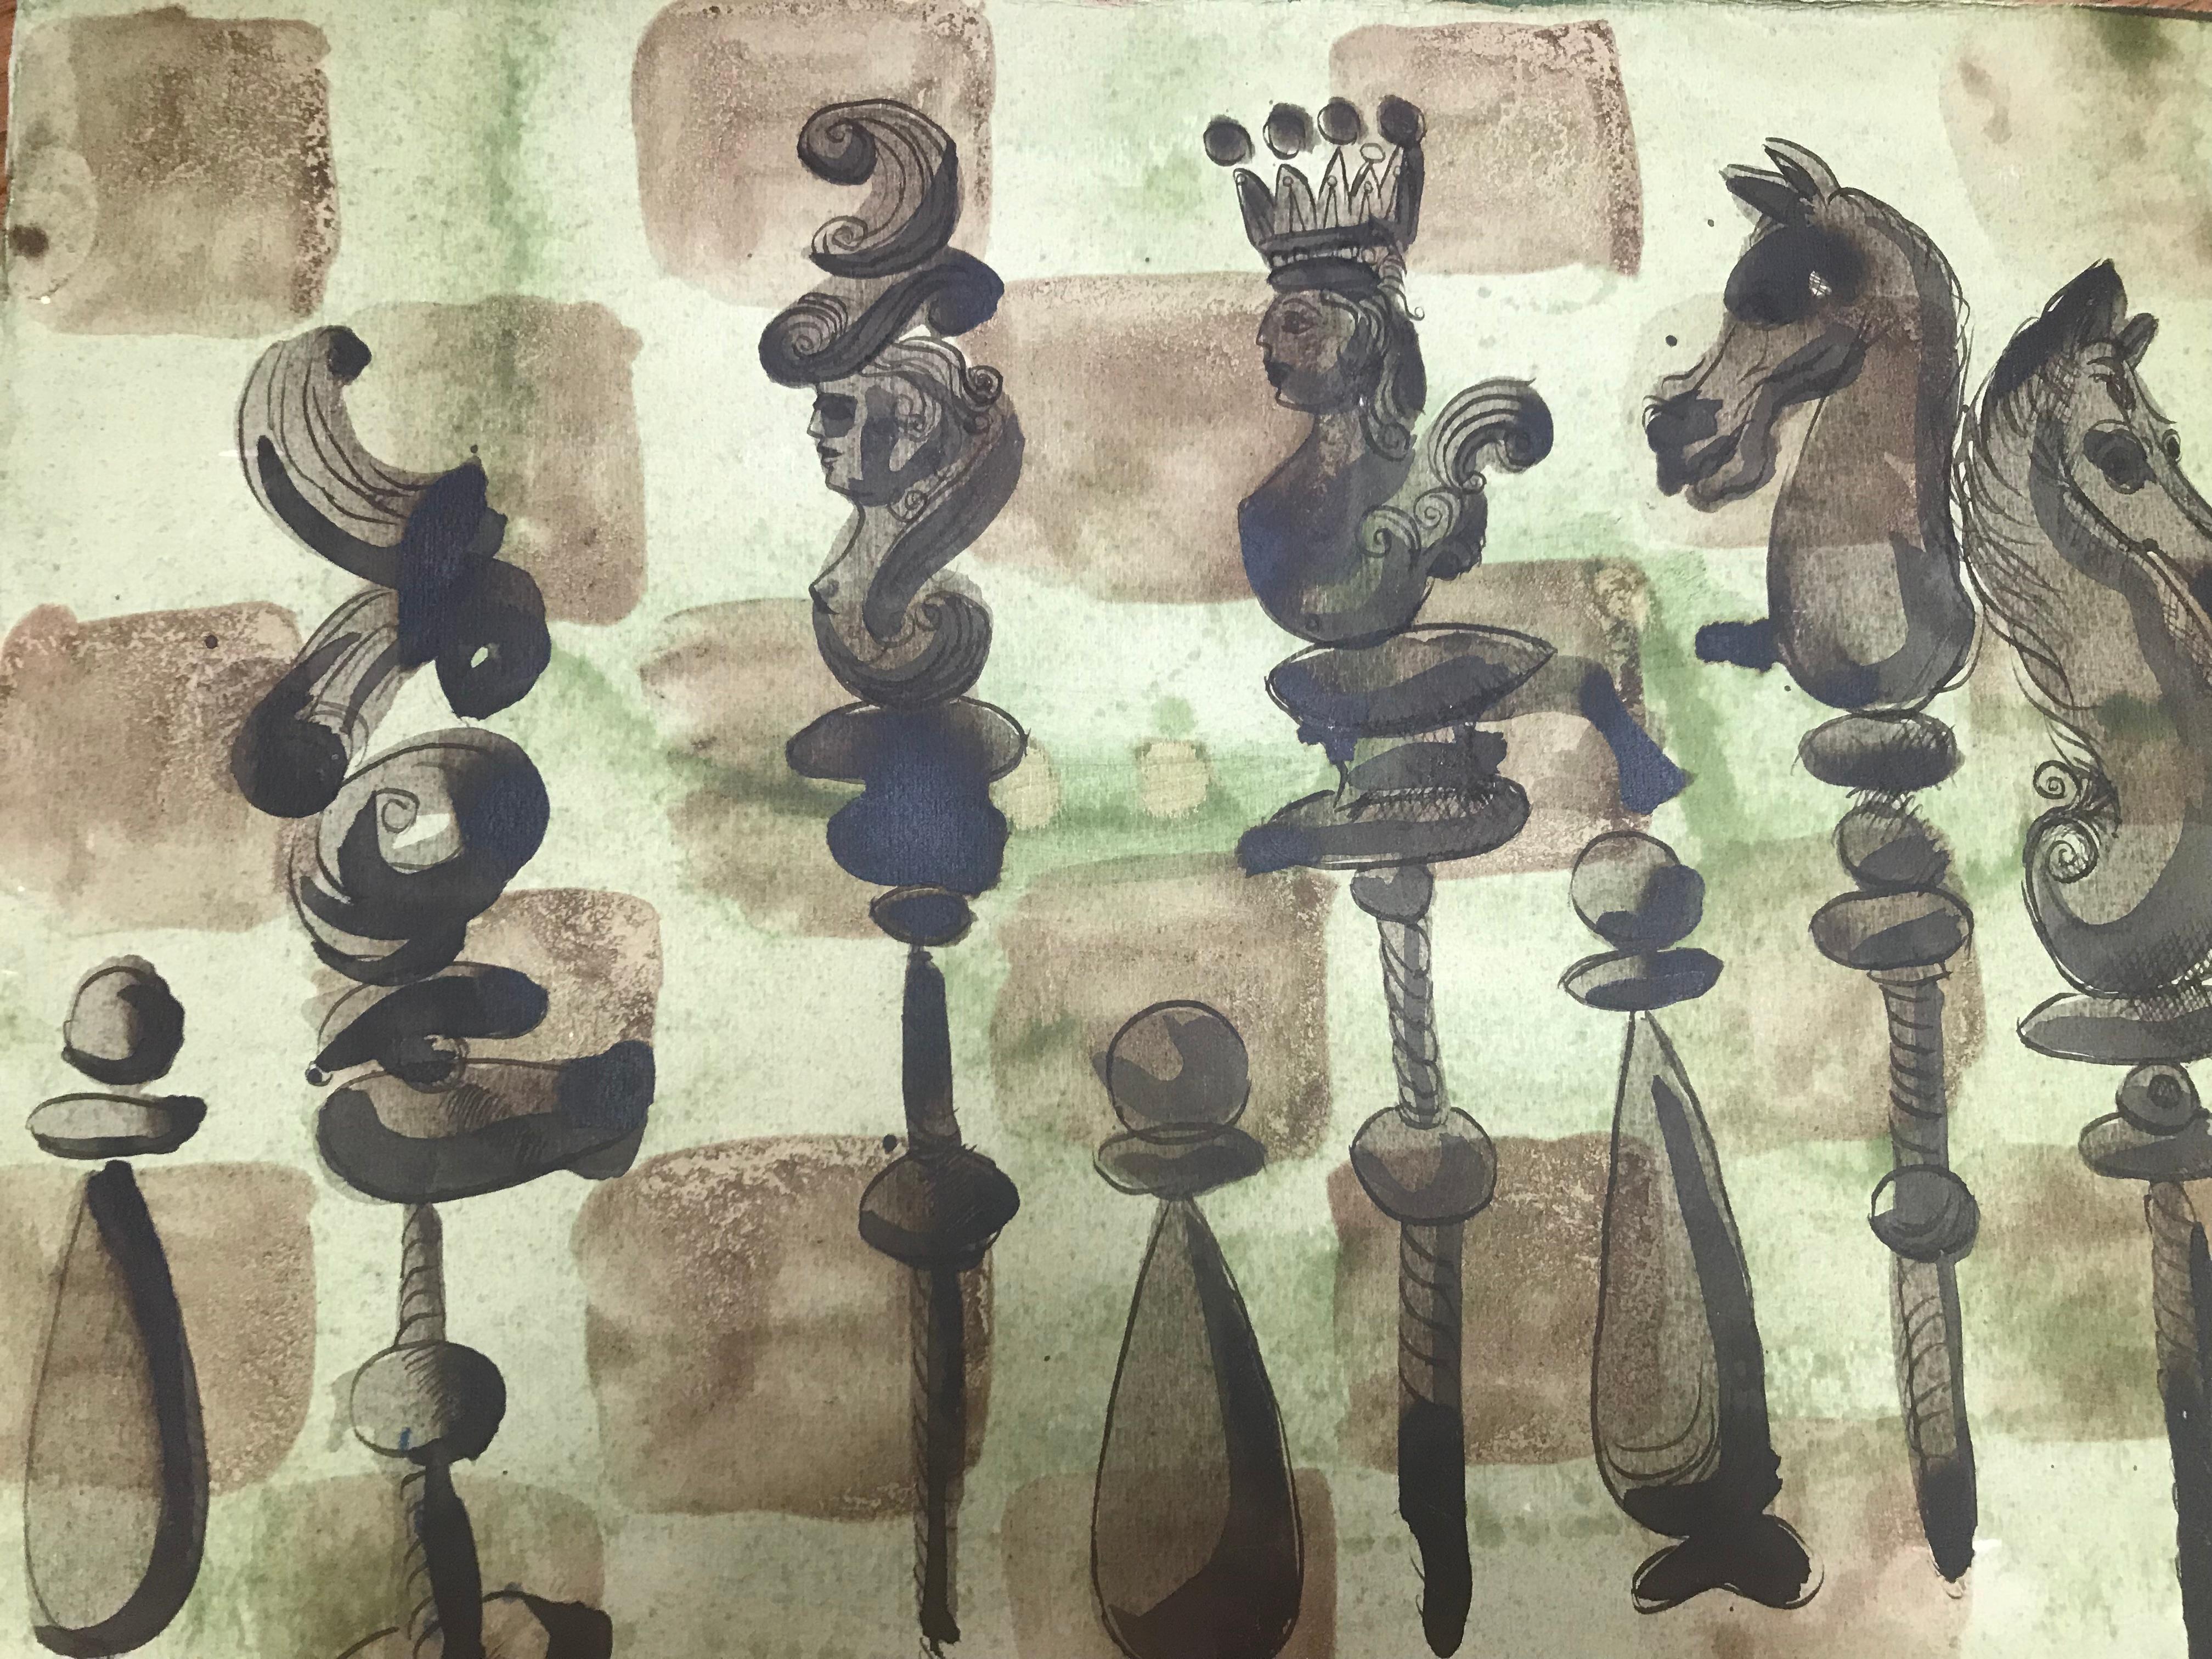 Elegant watercolor of a chess board and pieces, by Zev Harris.
Framed in a cerused walnut frame.
The artist, born Daniel Harris, studied at the Masters Institute of the Roerich Museum in Hungary, in New York City at the National Academy of Design,